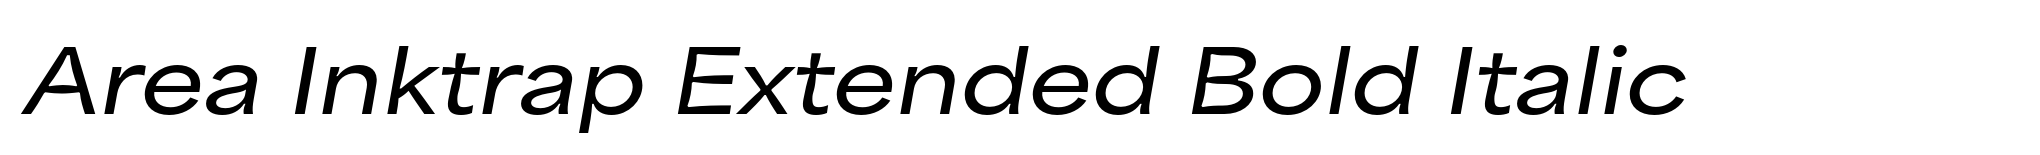 Area Inktrap Extended Bold Italic image